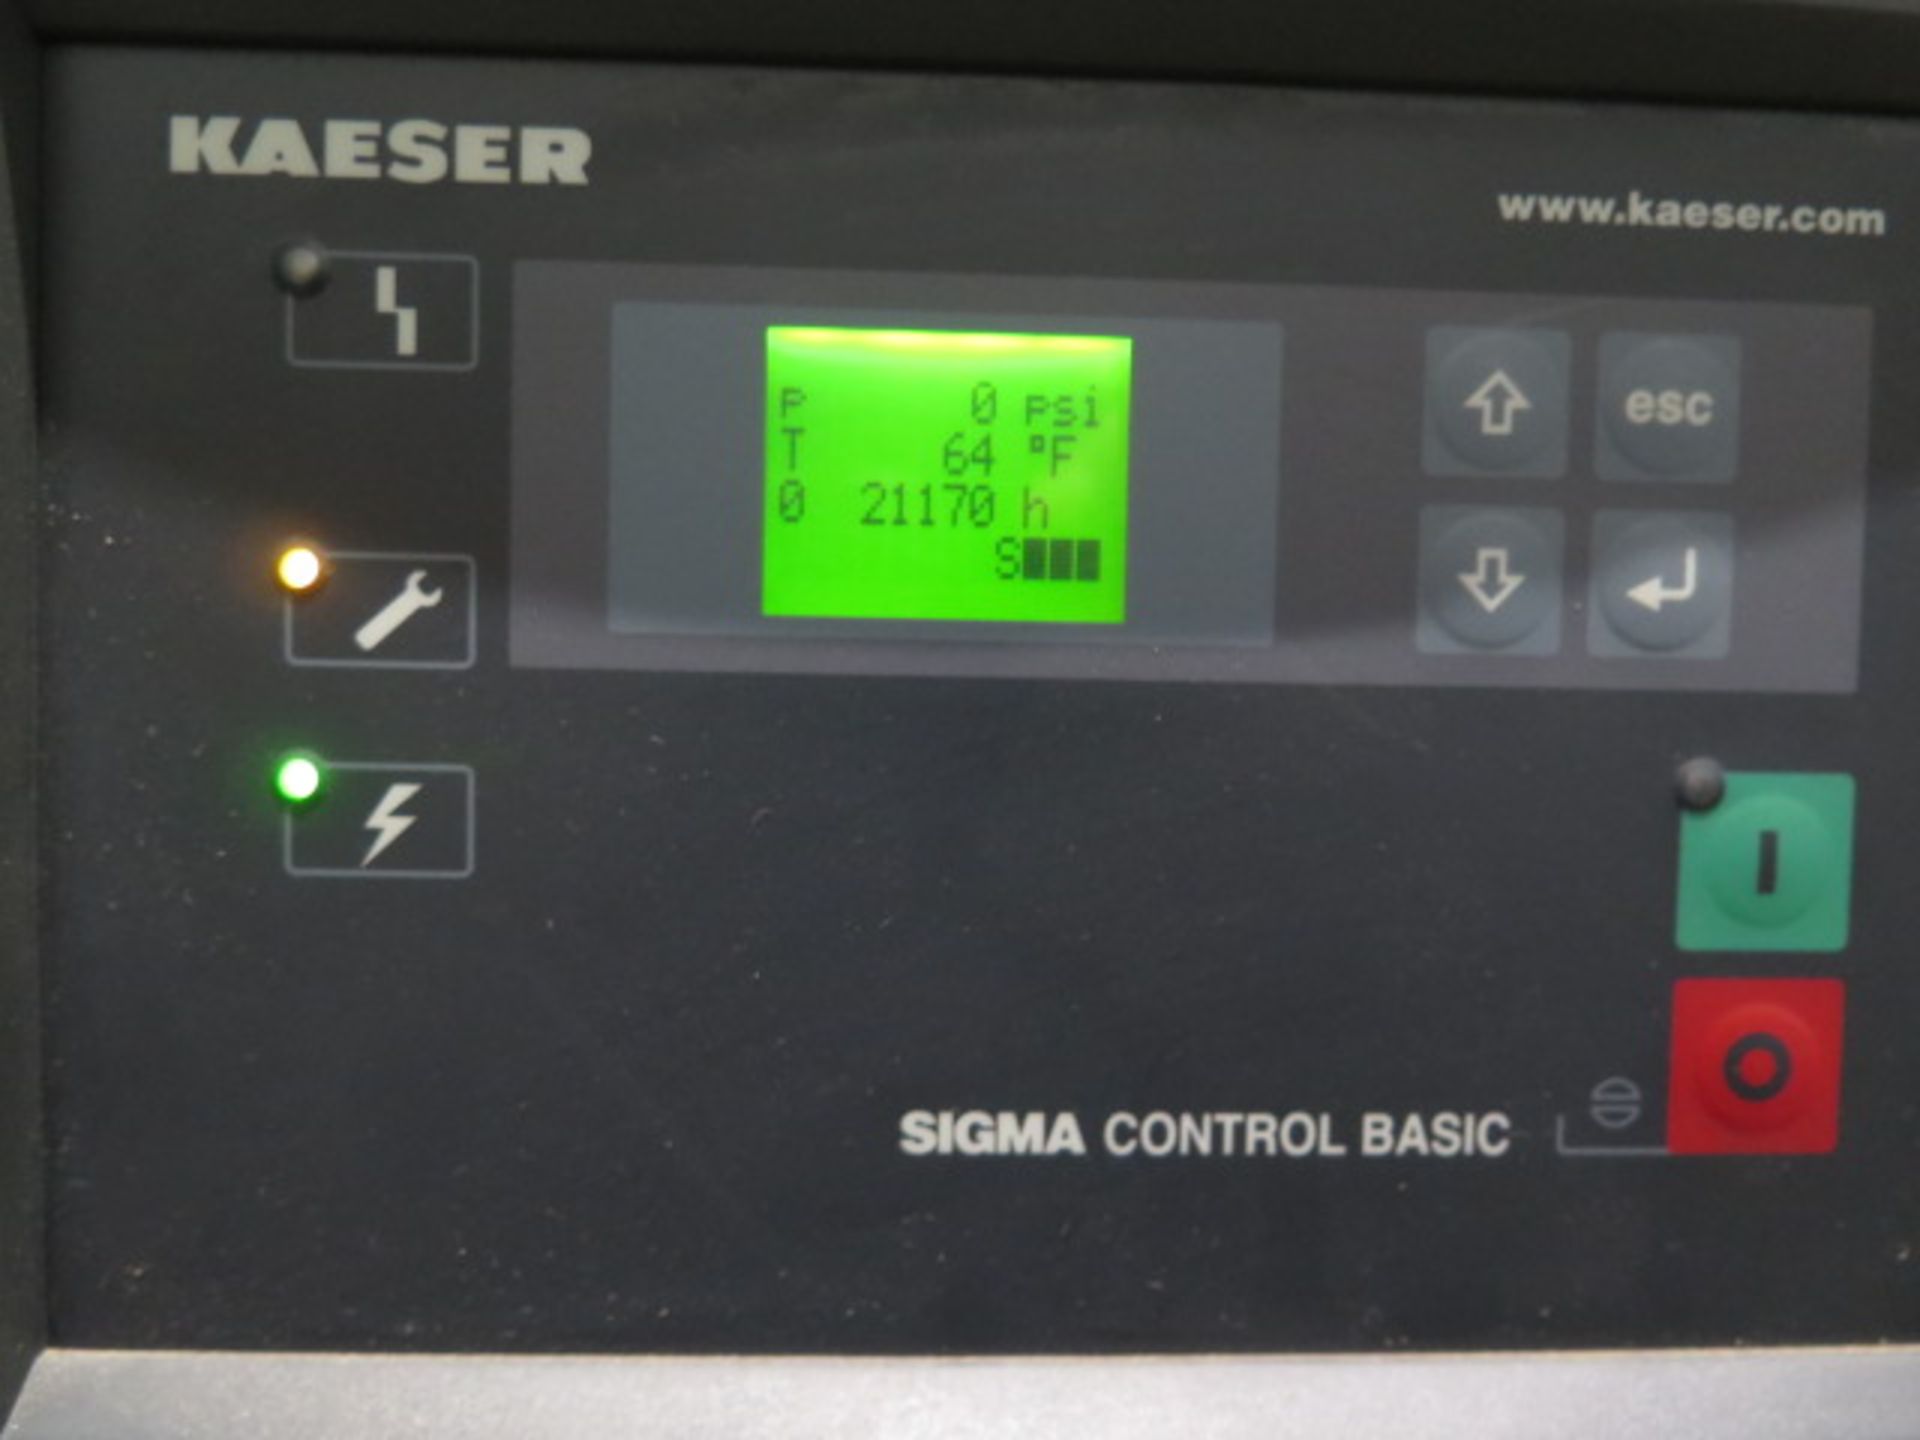 2015 Kaeser Aircenter SM10 10Hp Rotary Air Compressor s/n 1970 w/ Kaeser Sigma Controls, SOLD AS IS - Image 5 of 9